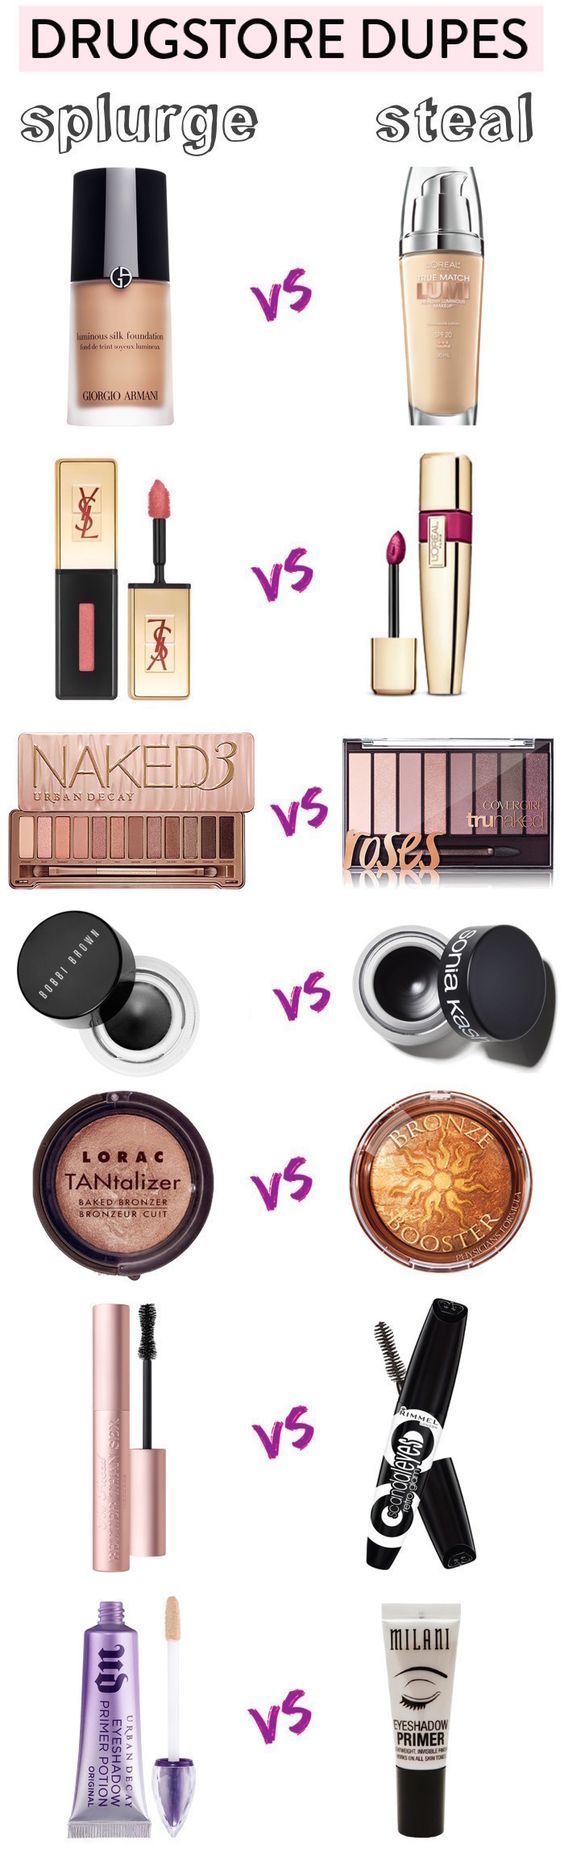 These 10 Makeup Dupe Hacks have saved me SO MUCH MONEY! I use makeup regularly so this post is AMAZING